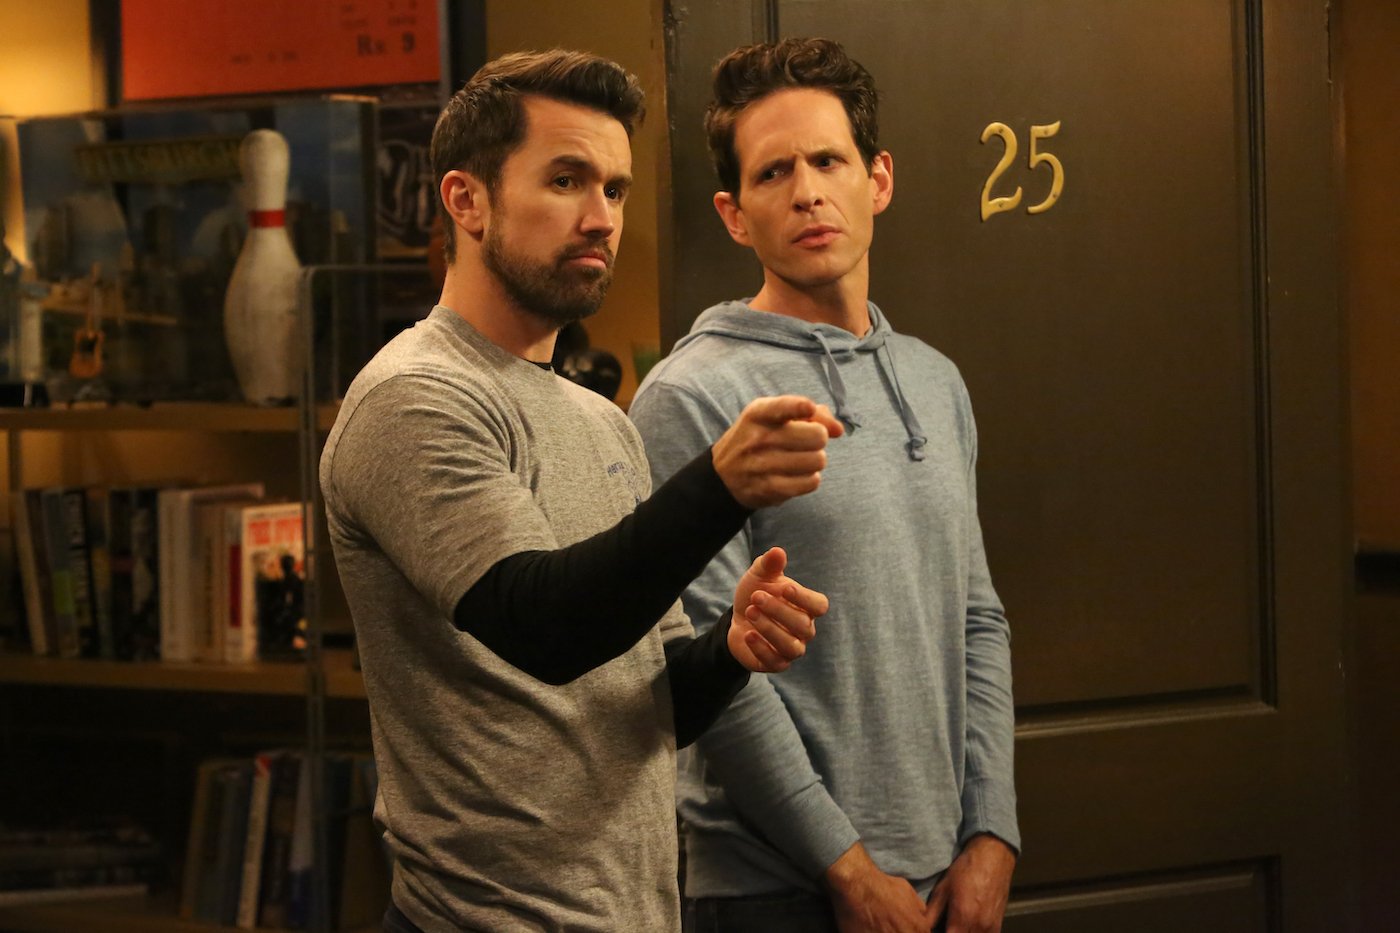 Mac and Dennis in a production still from 'It's Always Sunny in Philadelphia' Season 14.